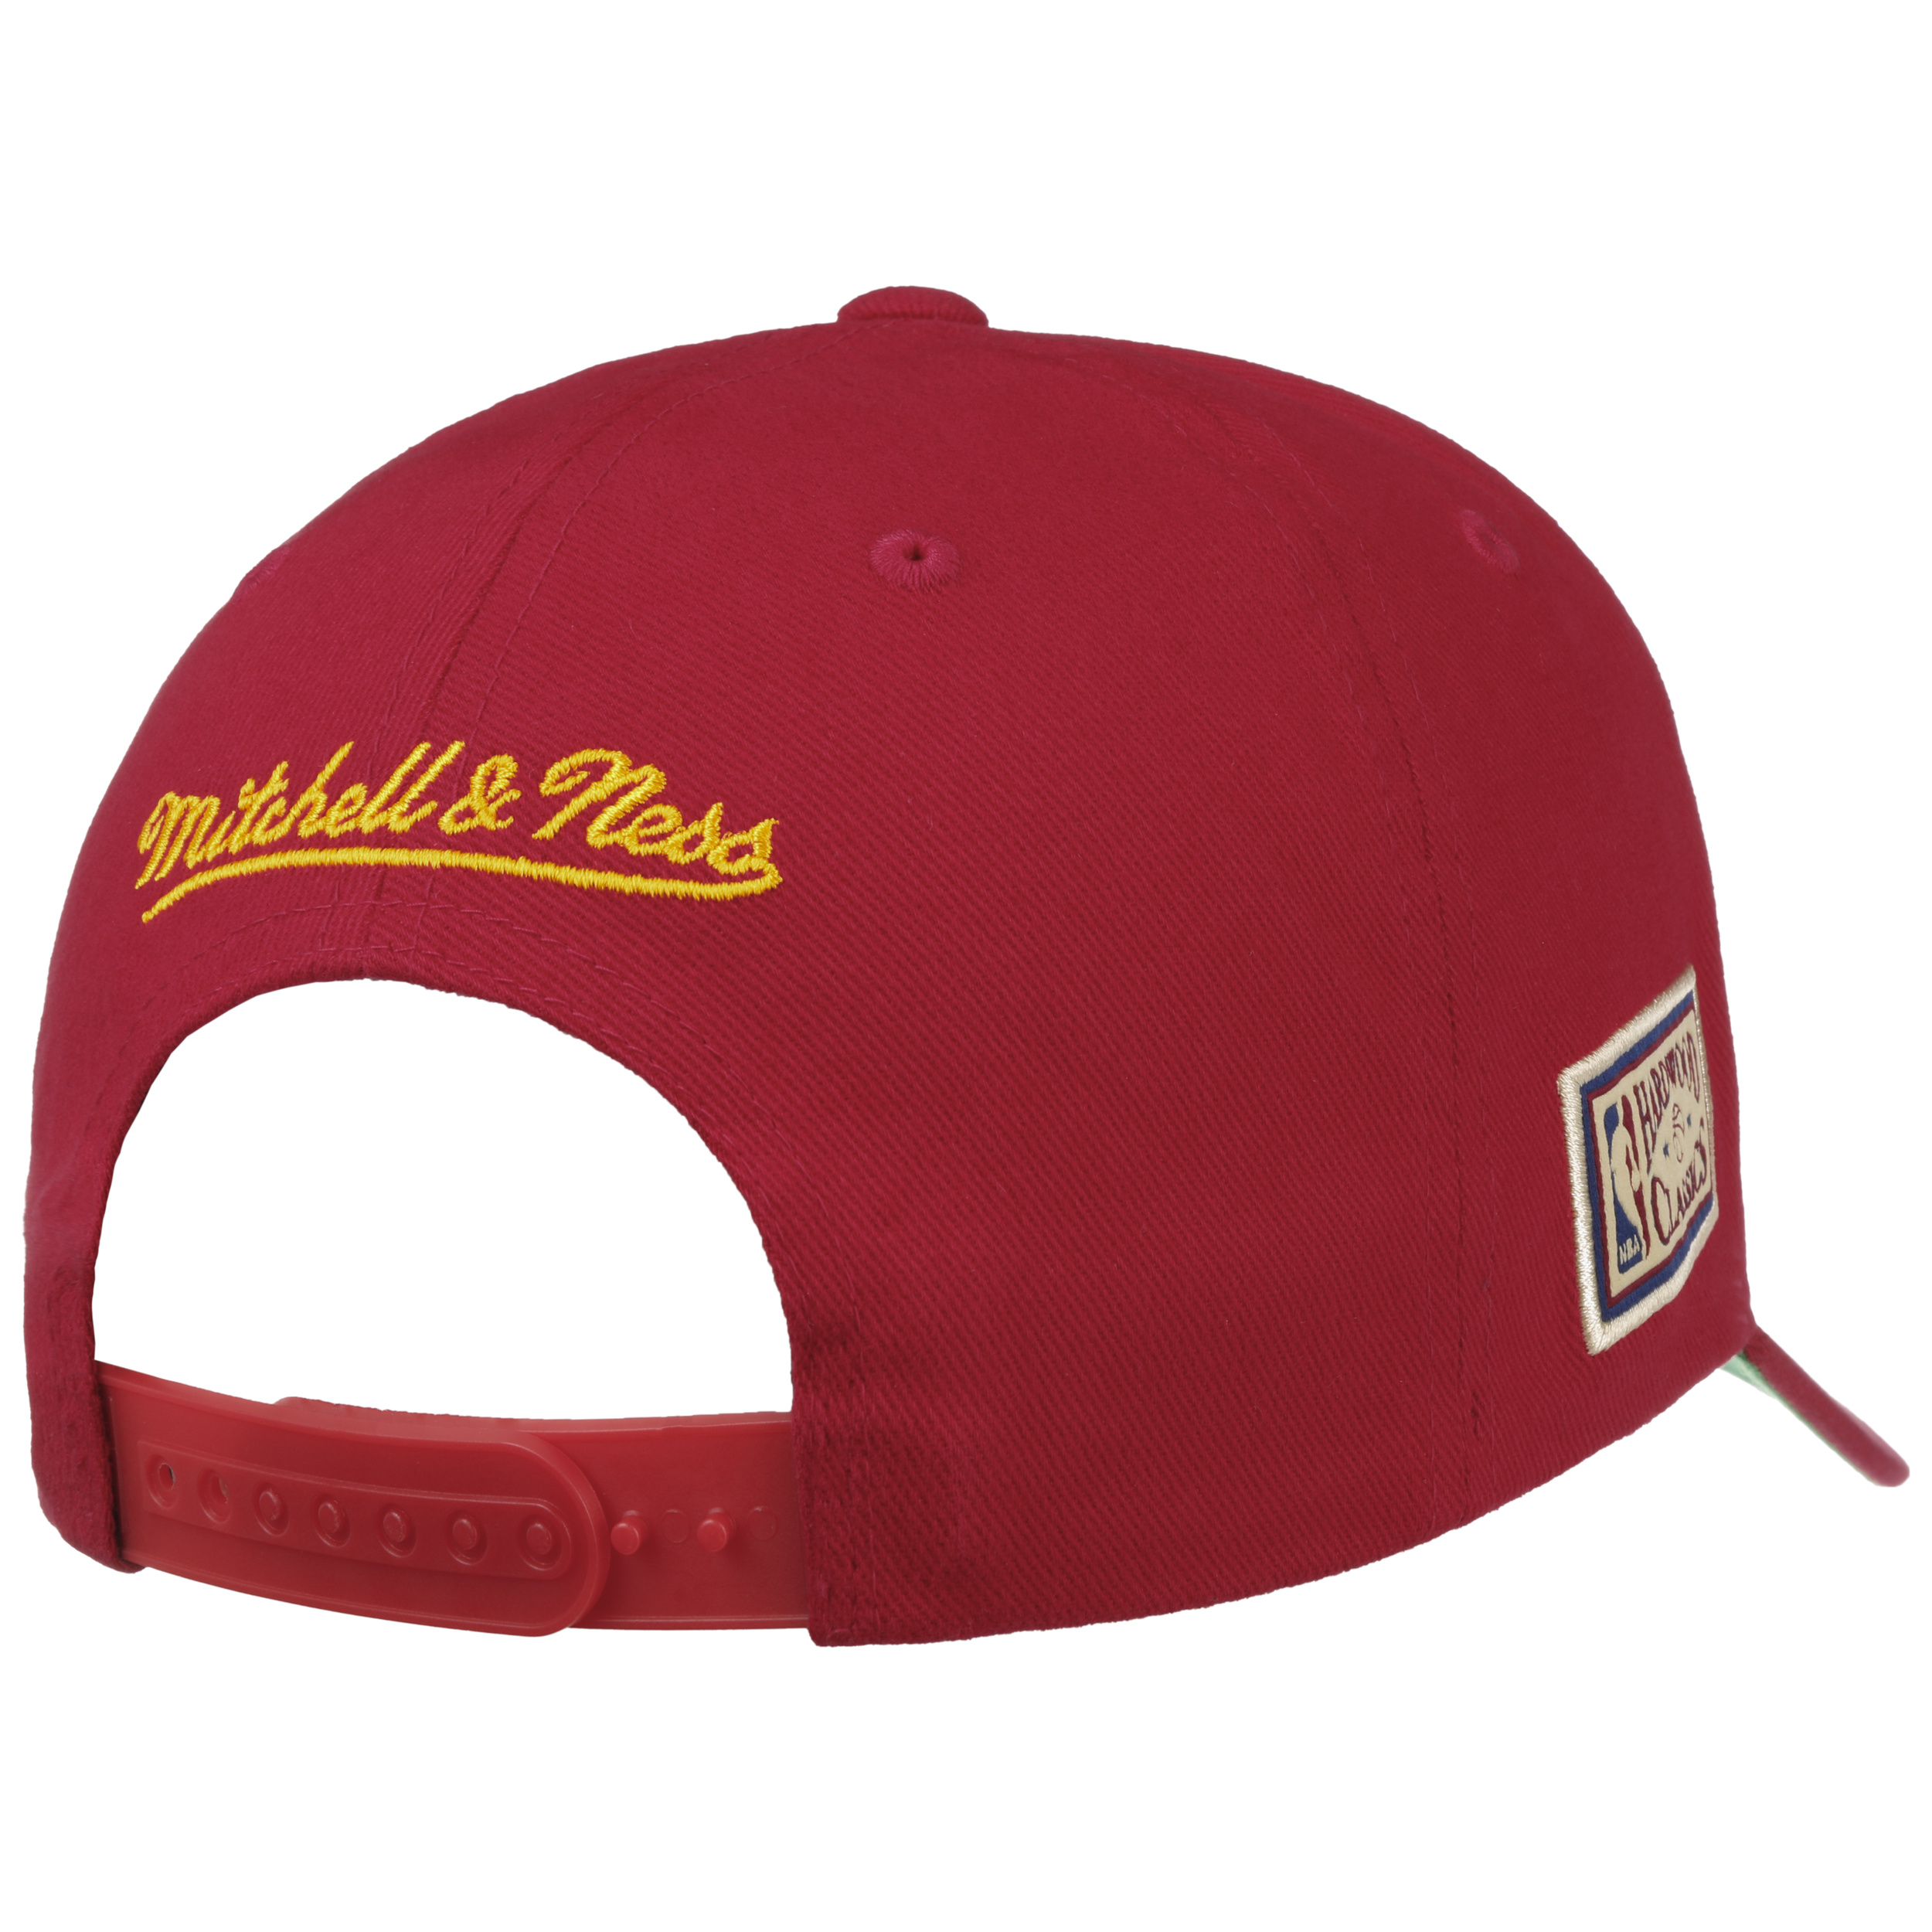 Tailscript 110 Rockets Cap by Mitchell & Ness - 37,95 €